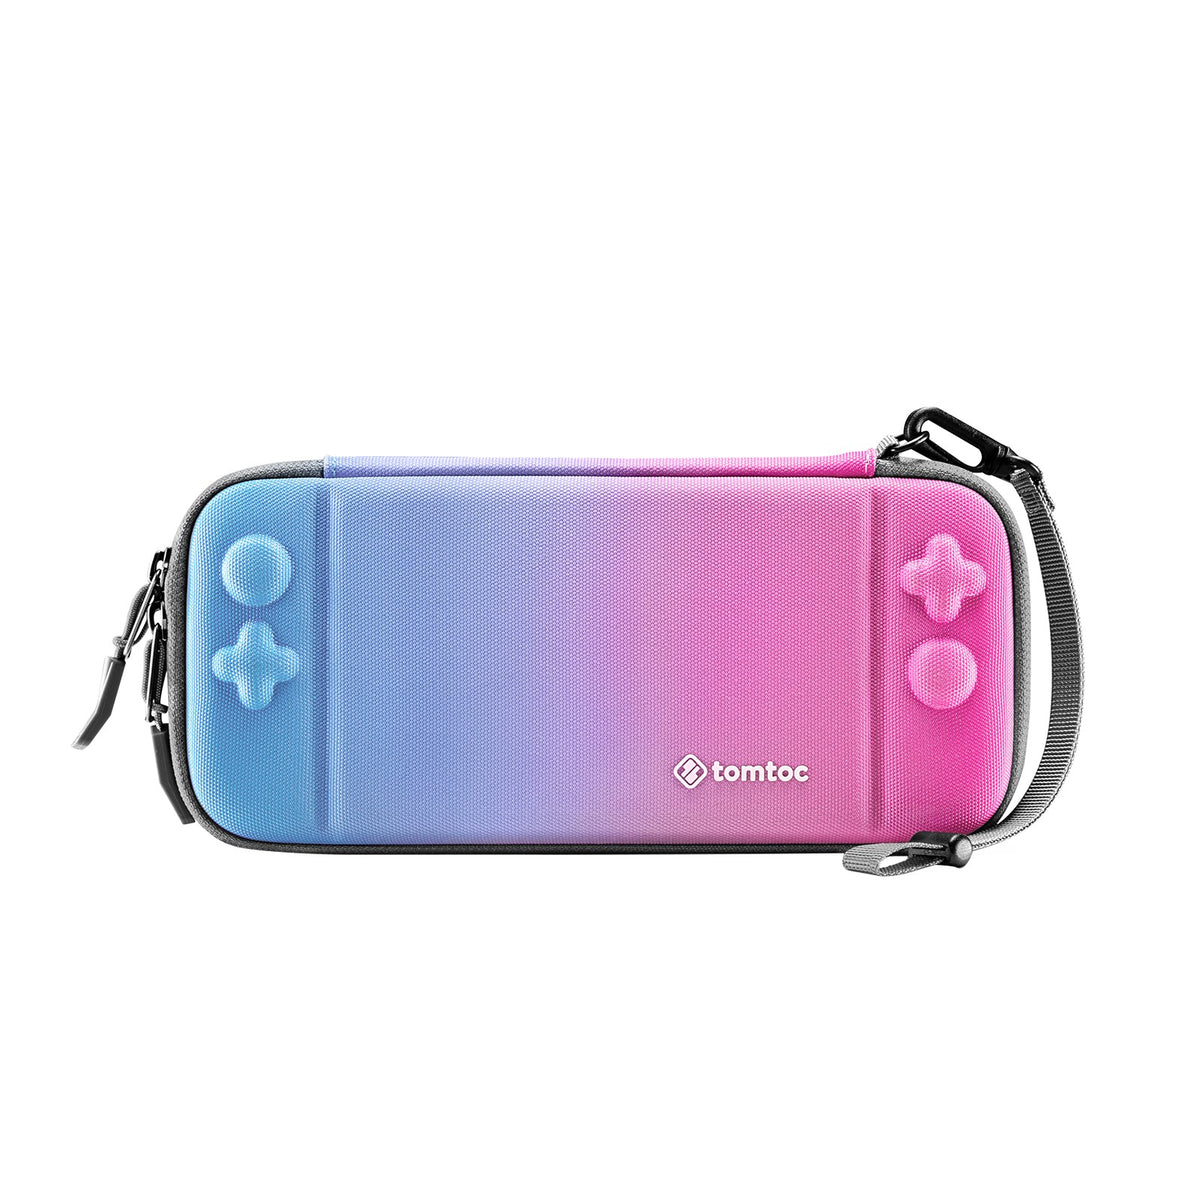 tomtoc Slim Case for Nintendo Switch